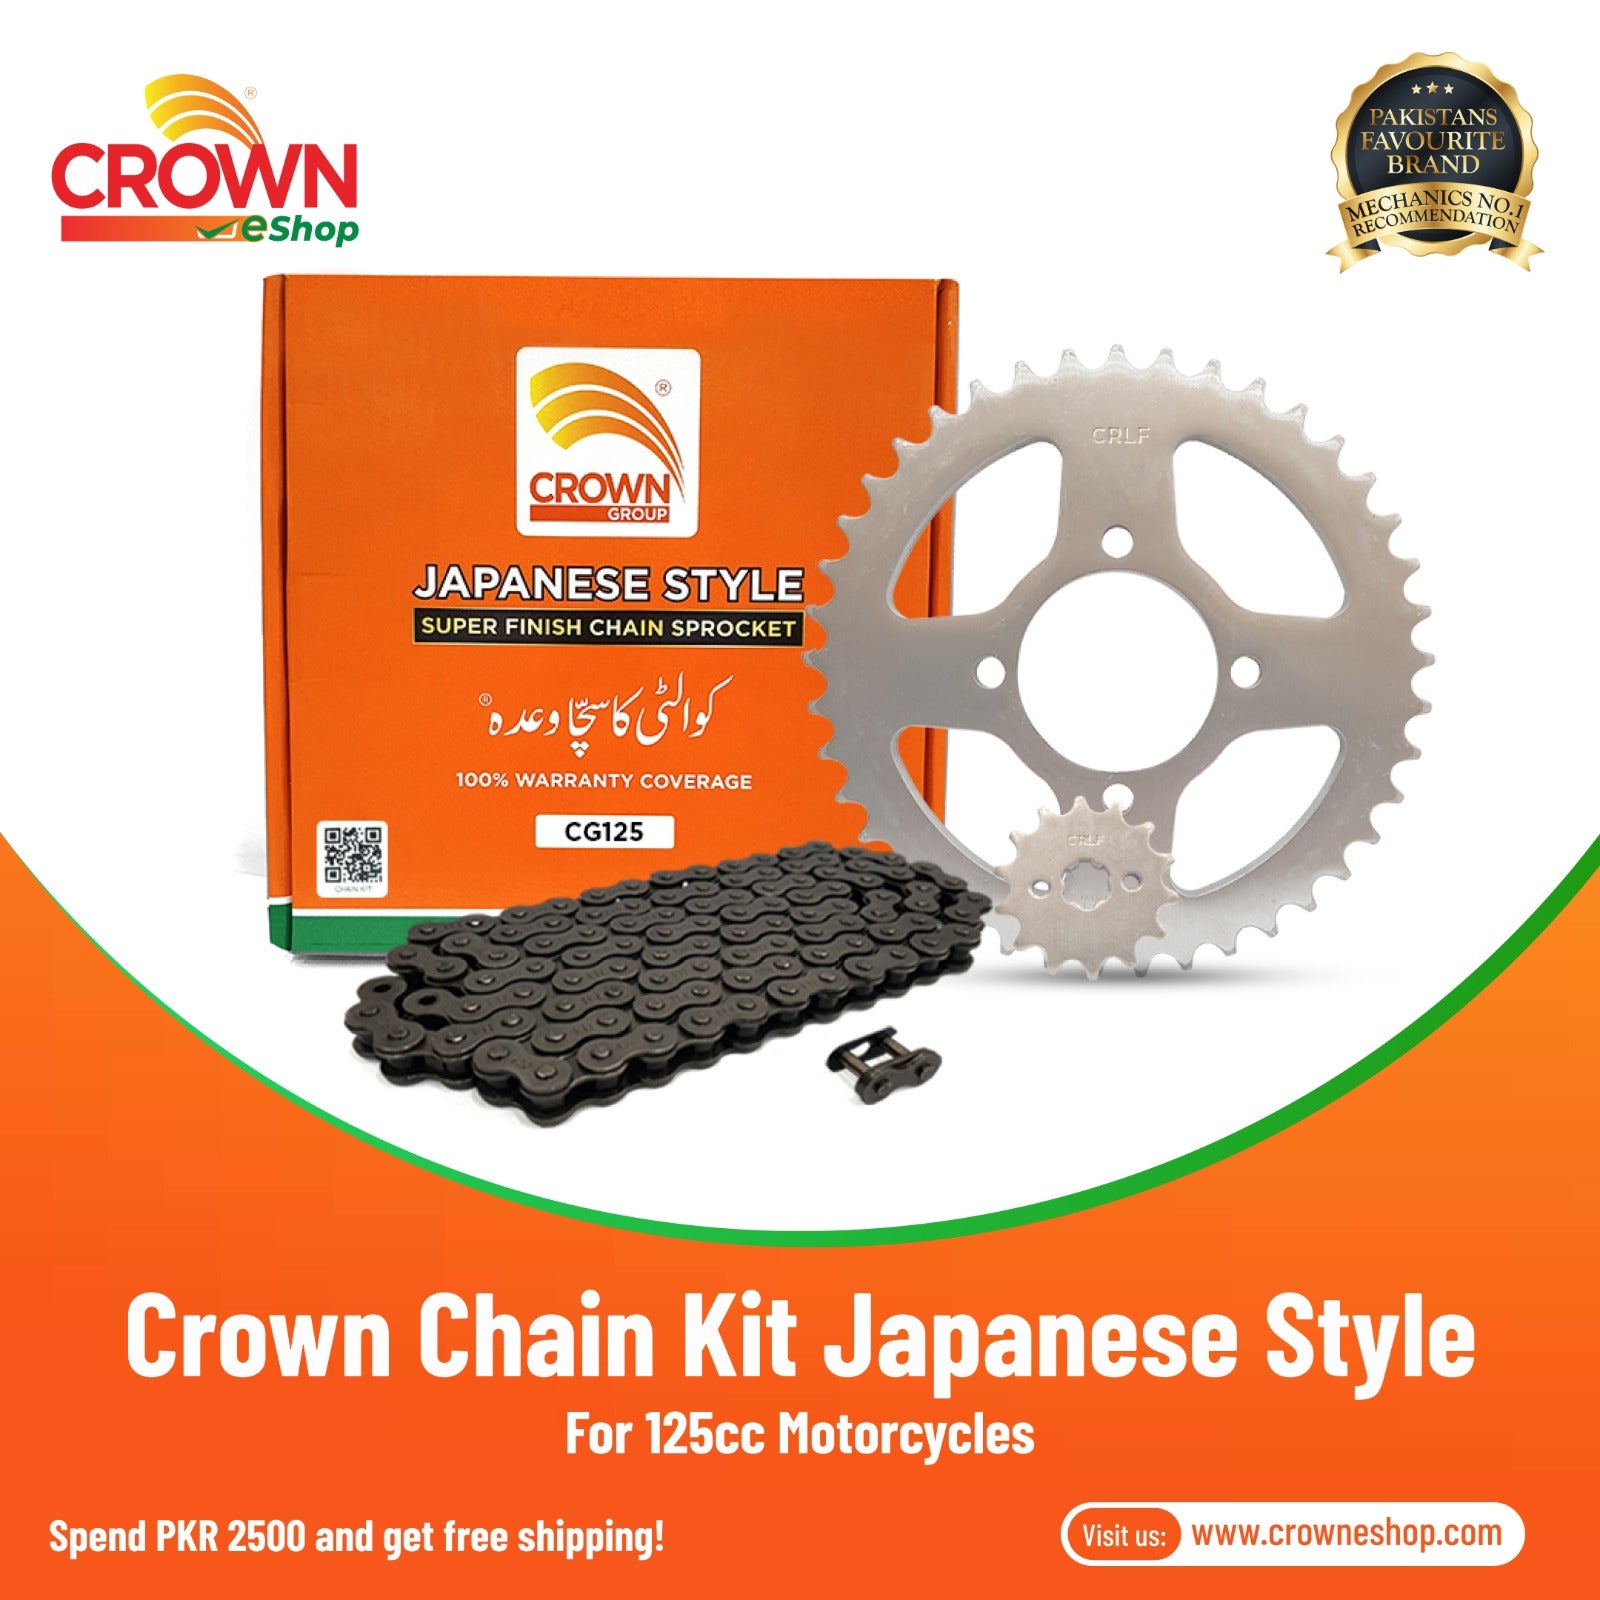 Crown Chain Kit Japanese Style For 125cc Motorcycles. - Crowneshop